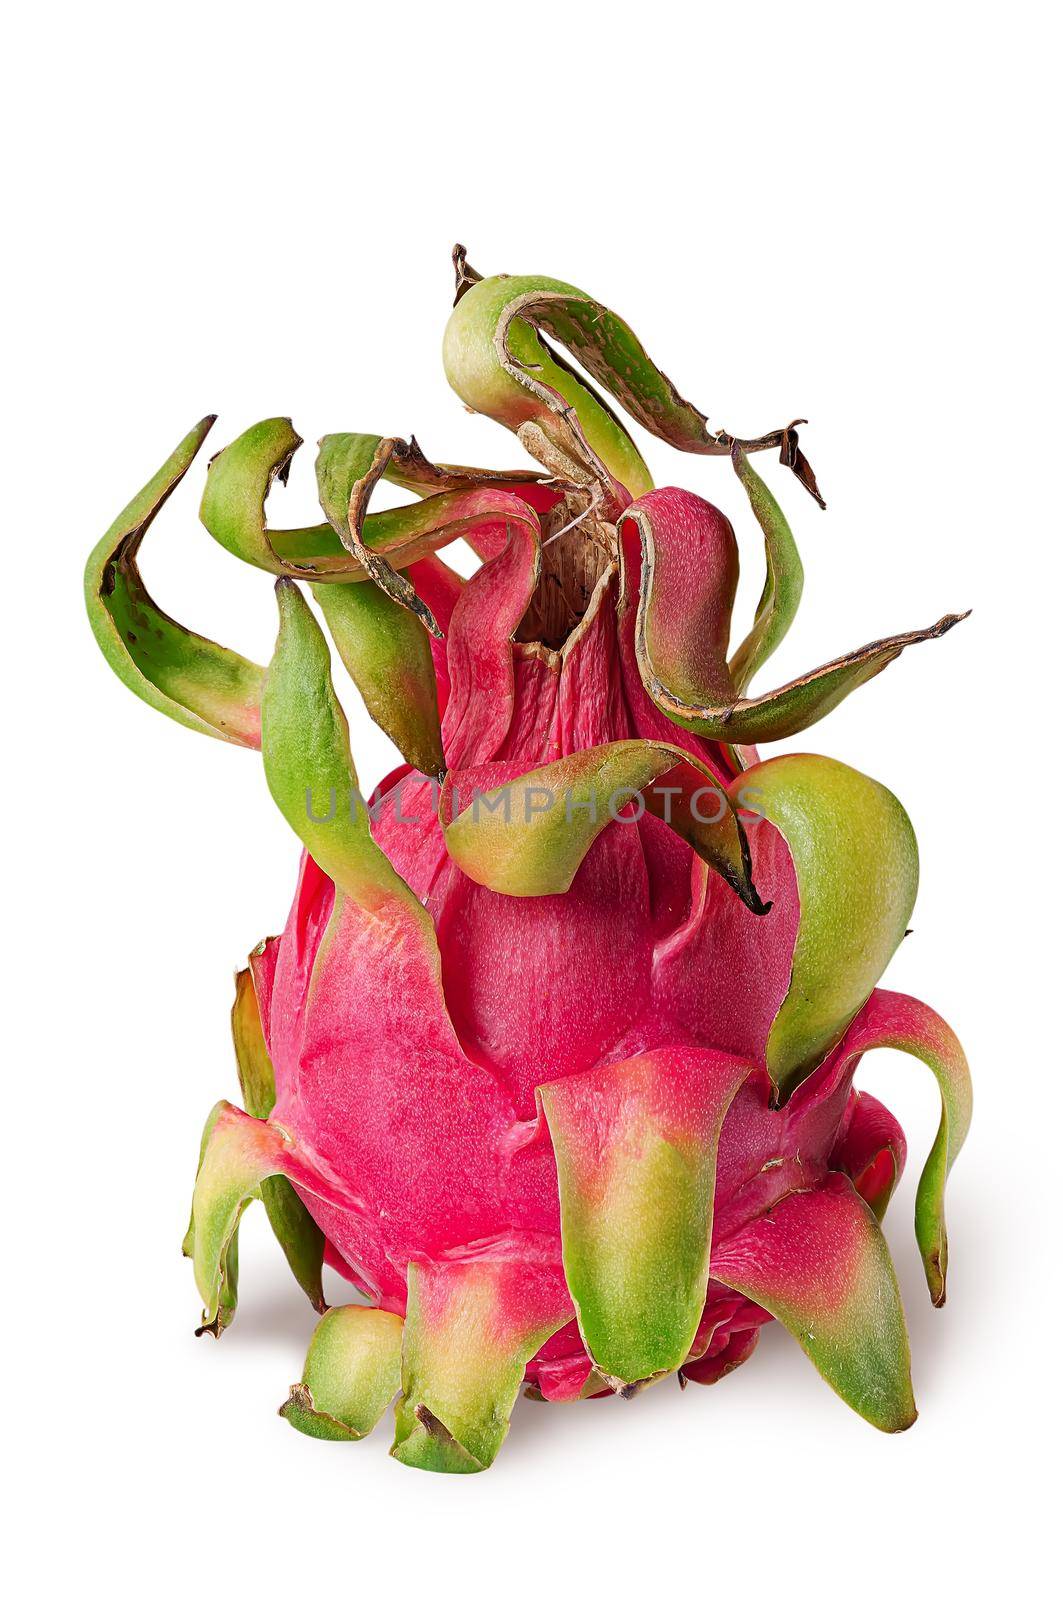 Dragon fruit vertically isolated on a white by Cipariss